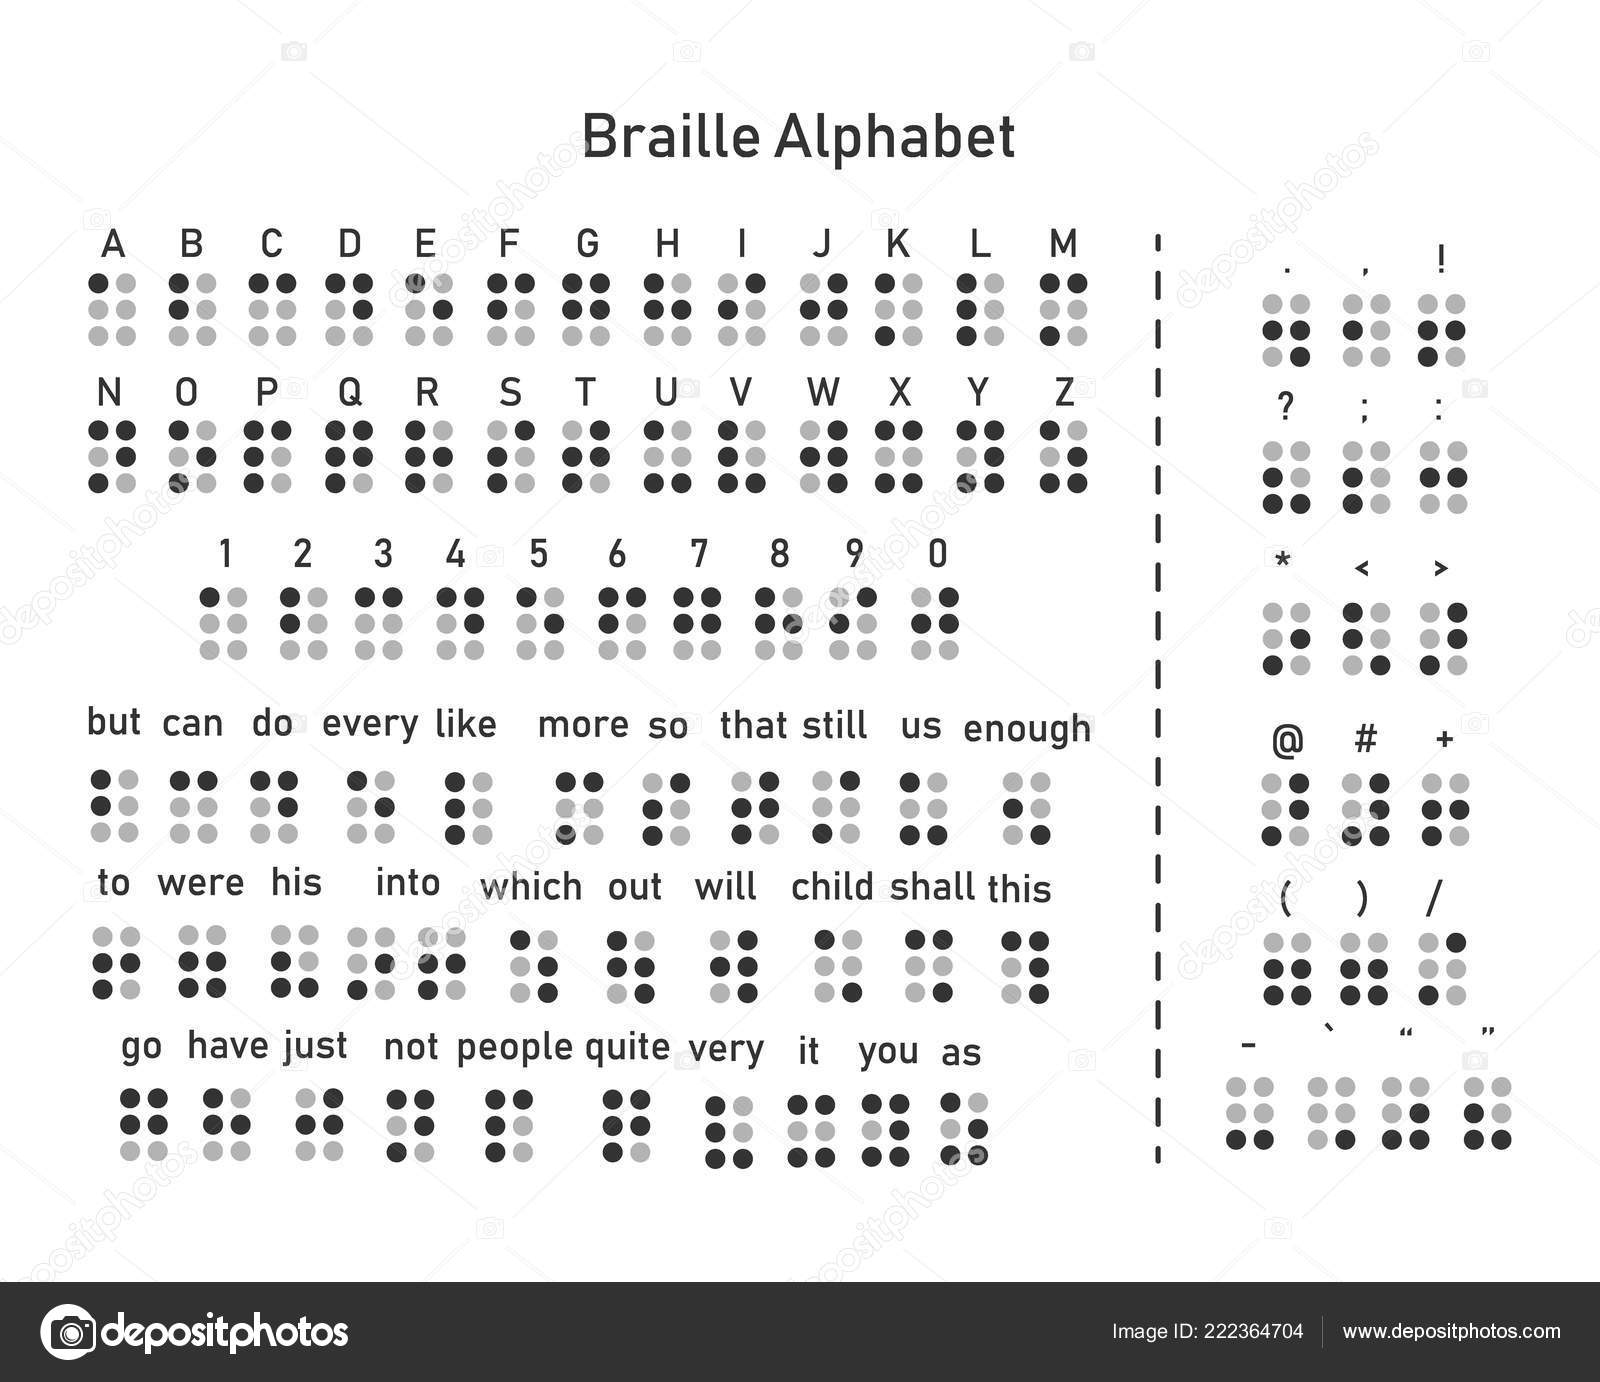 english-alphabet-and-numbers-are-decorated-with-braille-words-and